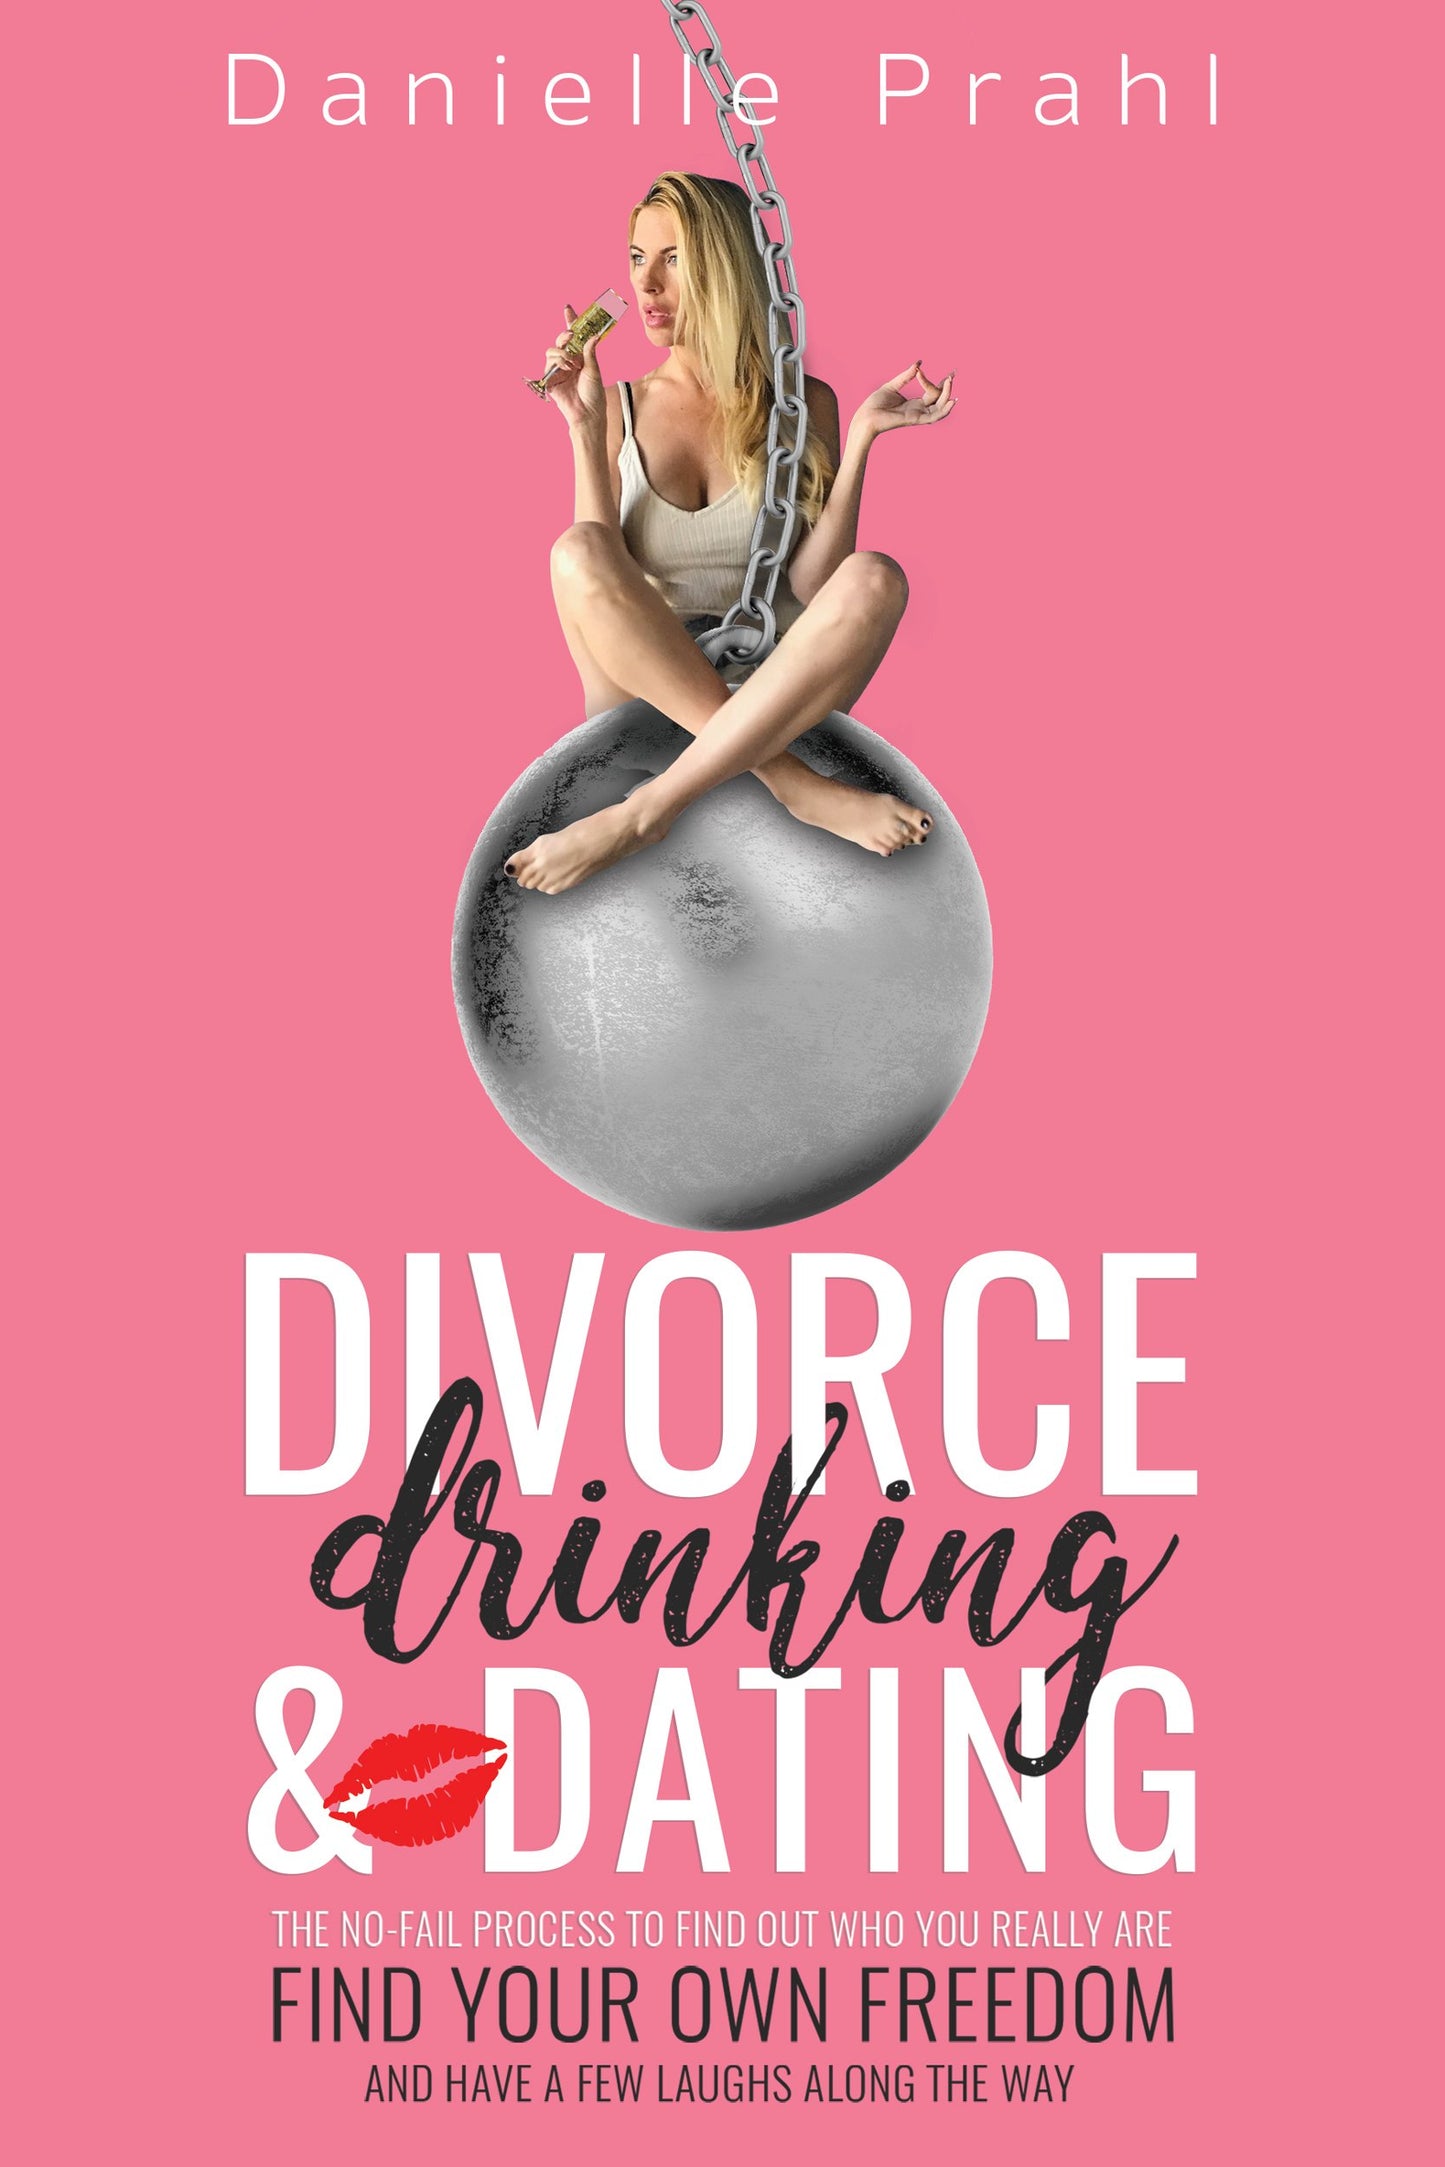 Divorce, Drinking and Dating: The no-fail process to find out who you really are, find your own freedom, and have a few laughs along the way